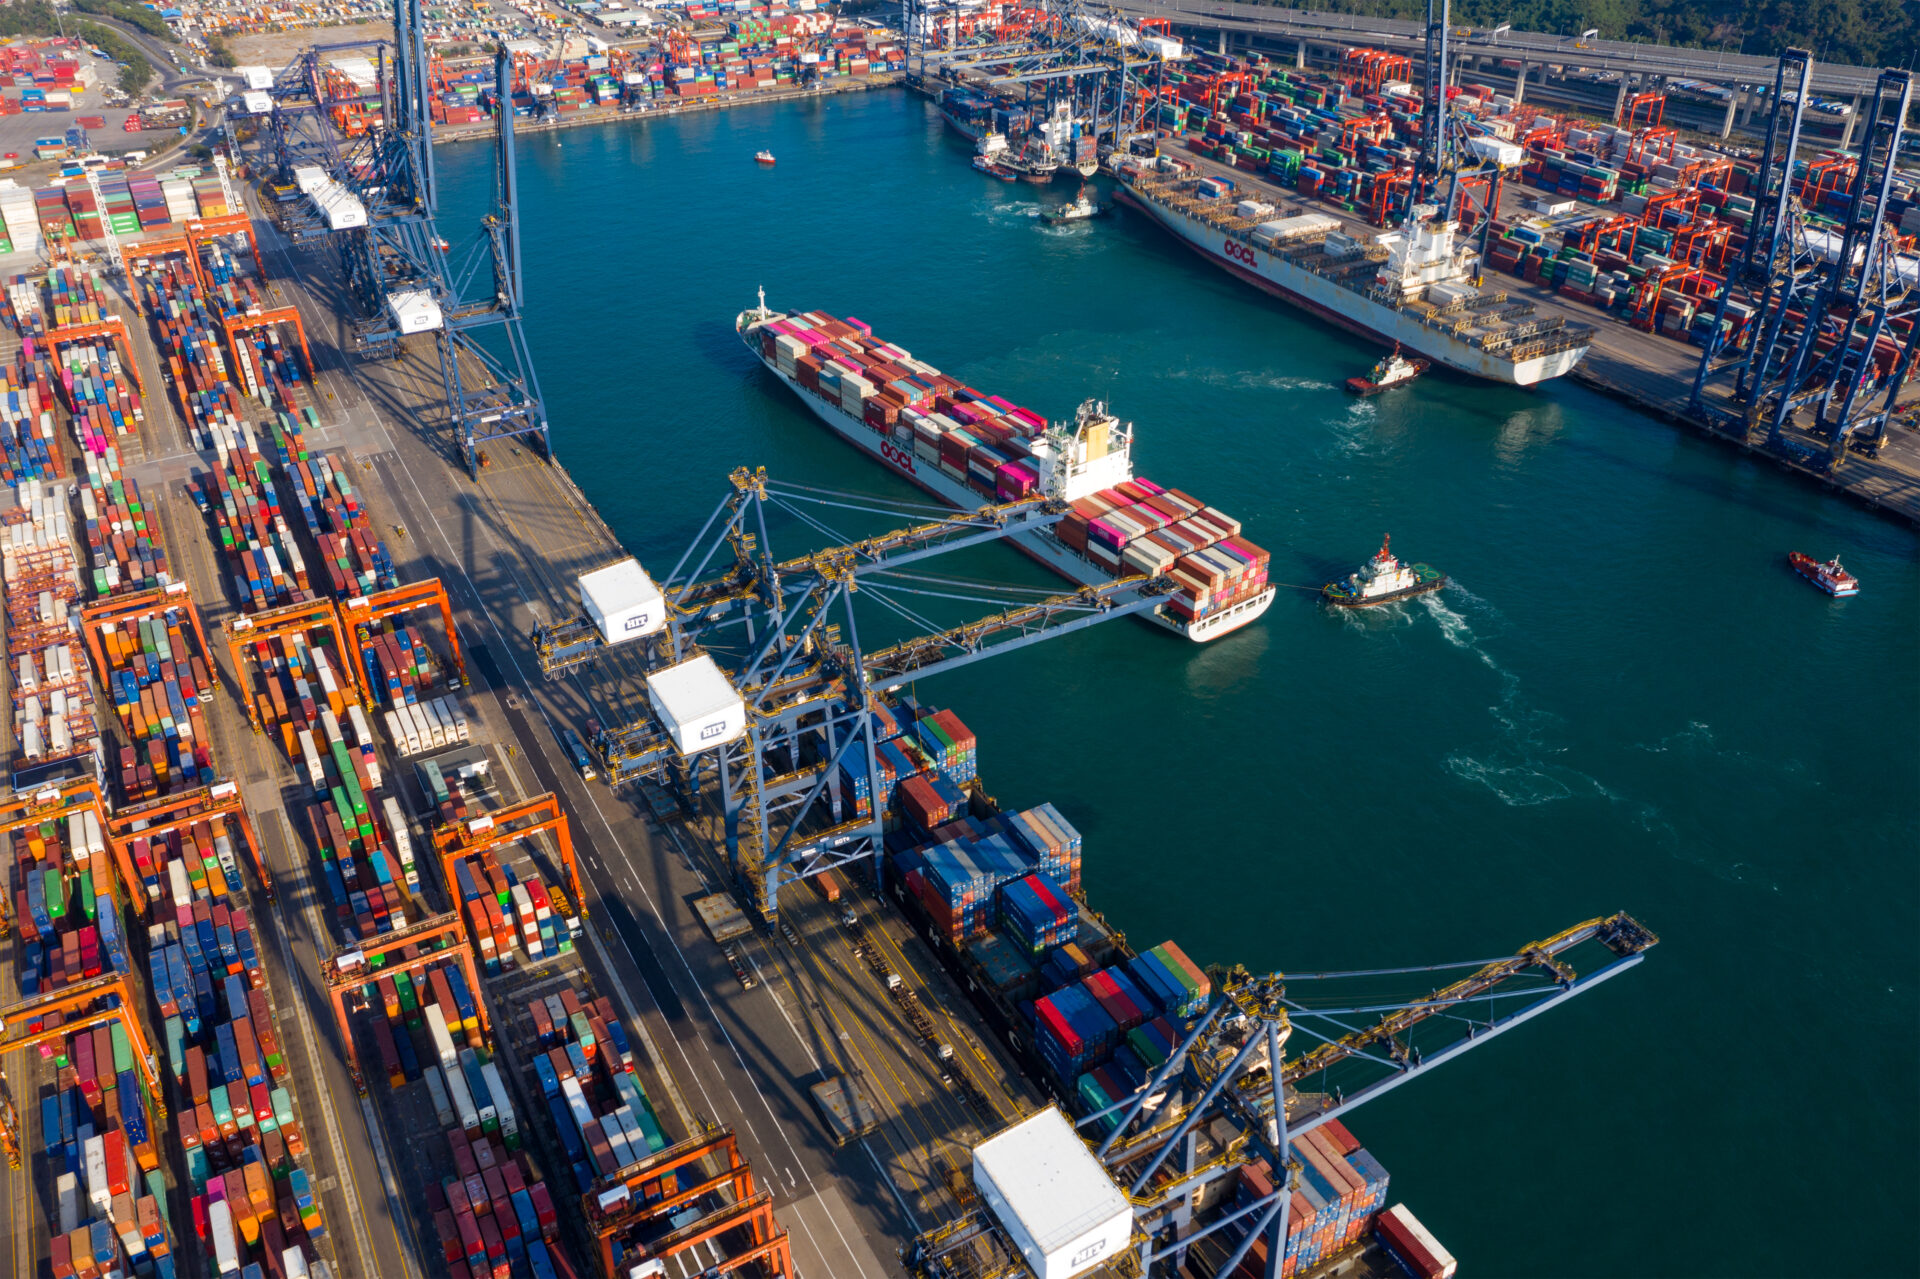 Our experienced team handles all aspects of port agency in uk , including vessel clearance, documentation, customs procedures, berthing arrangements, and cargo operations.